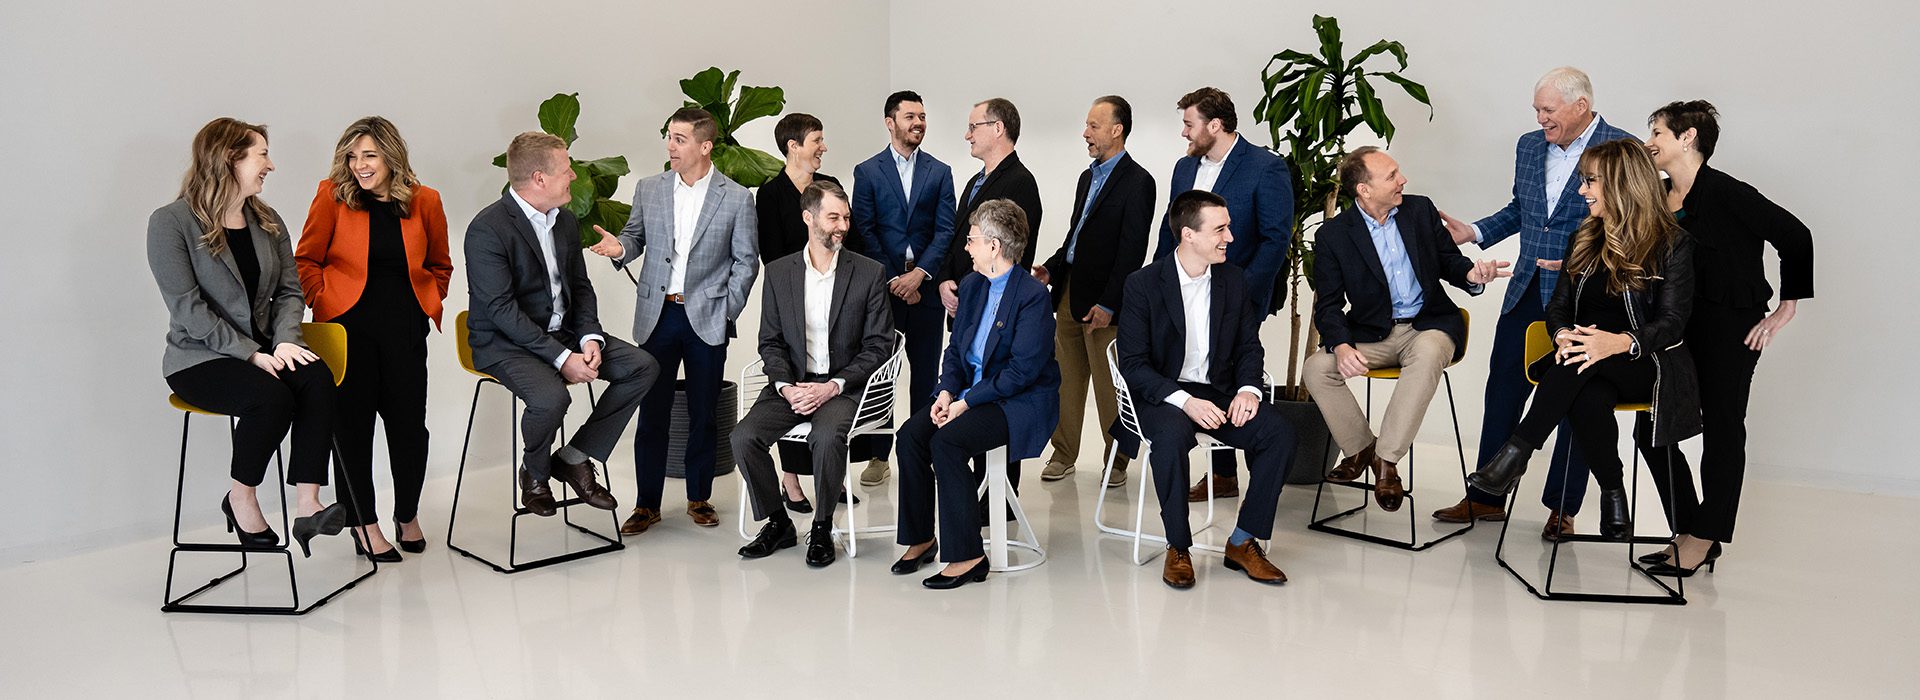 Meet Our Team - BCF Group Team Sitting and Smiling Together for a Casual Photo in a White Room